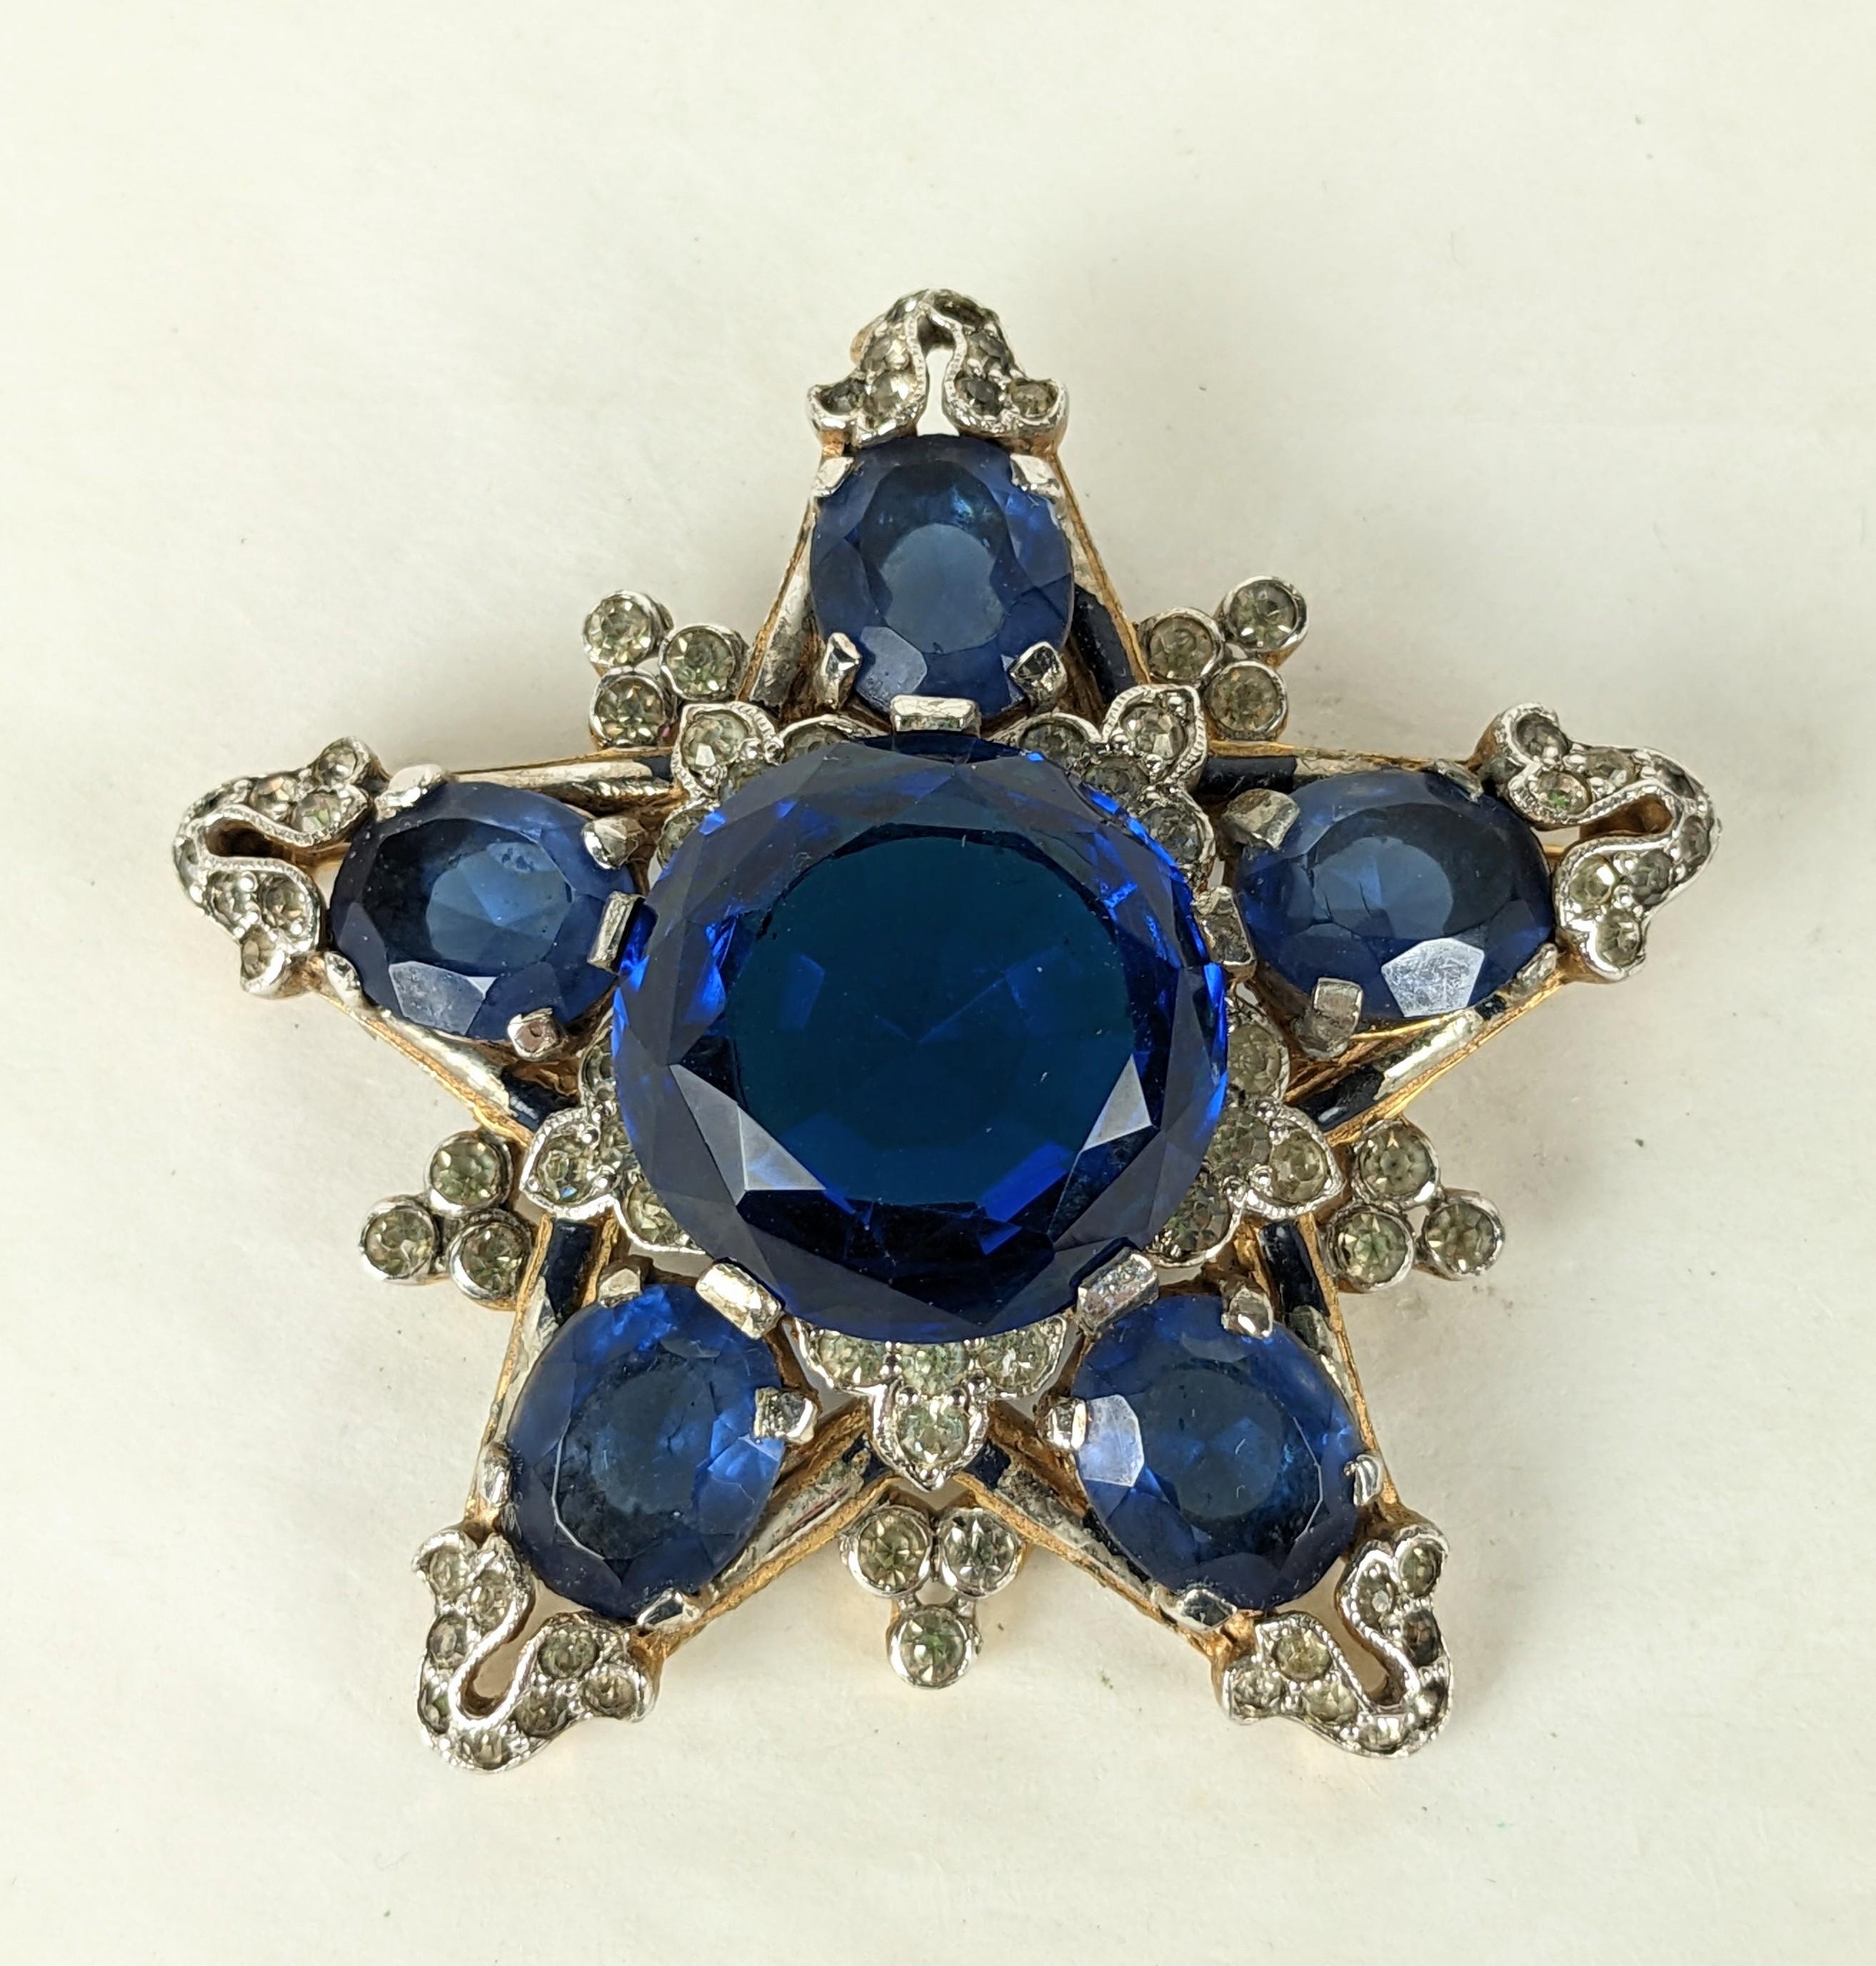 Attractive Trifari Eugenie Star Brooch of faux oval sapphires with navy enamel and pave accents. Alfred Phillipe for Trifari 1930's. 2.25